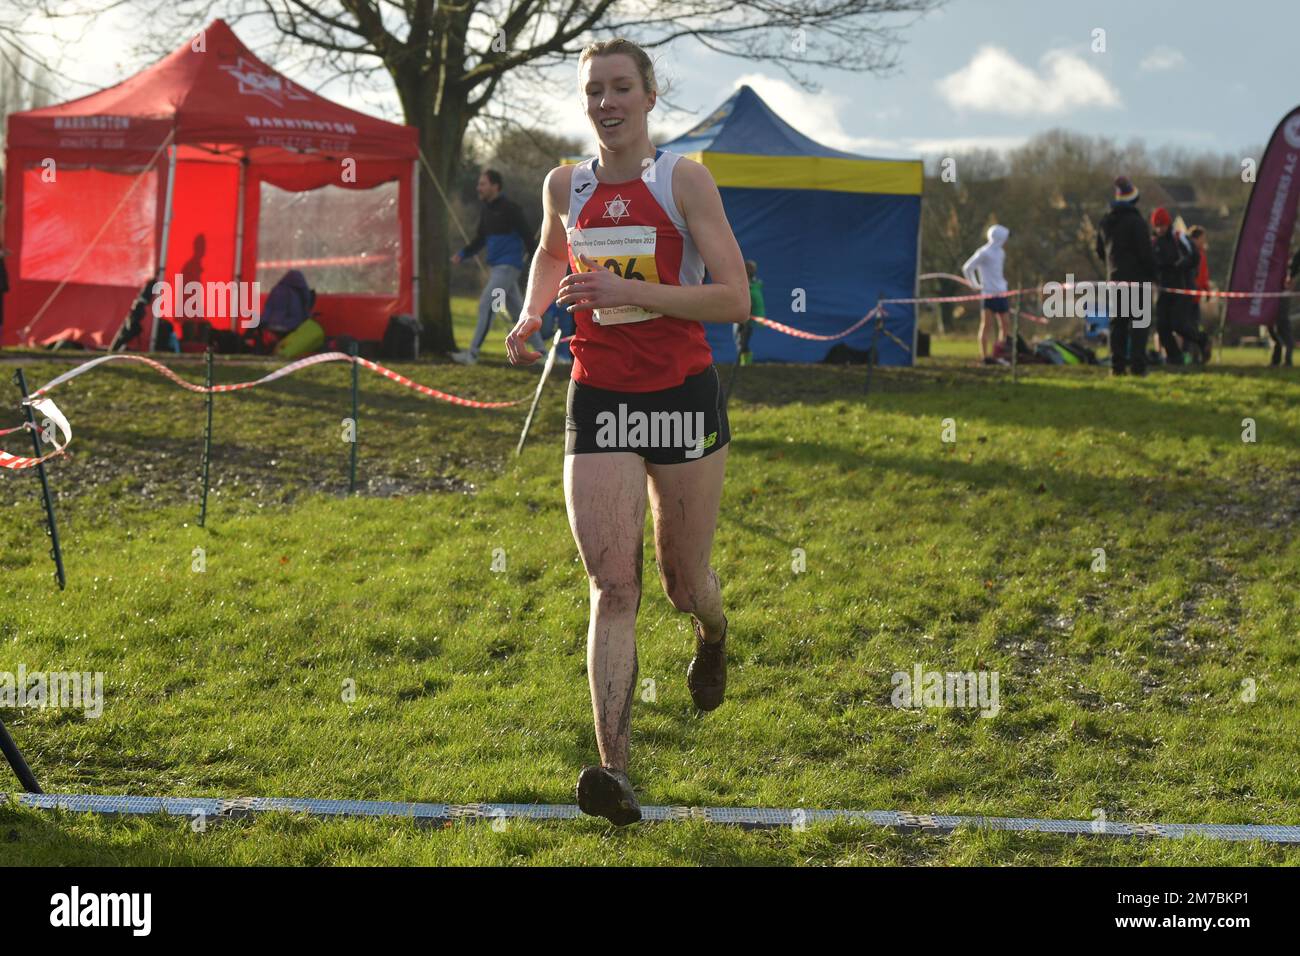 Winsford, UK. Sunday, 8 January 2022. The colder, 7 °C, start of the day. After torrential rain in the morning, sky clears up. Some sunshine, partly cloudy. Harriet Knowles-Jones, Warrington athletics club wins Cheshire County AA 2023 Annual Cross Country Championships, senior/veteran female and u20 female category. The crowds are excited to see her return to cross country. Knights Grange, Winsford, UK. © Yoko Shelley Credit: Yoko Shelley/Alamy Live News Stock Photo